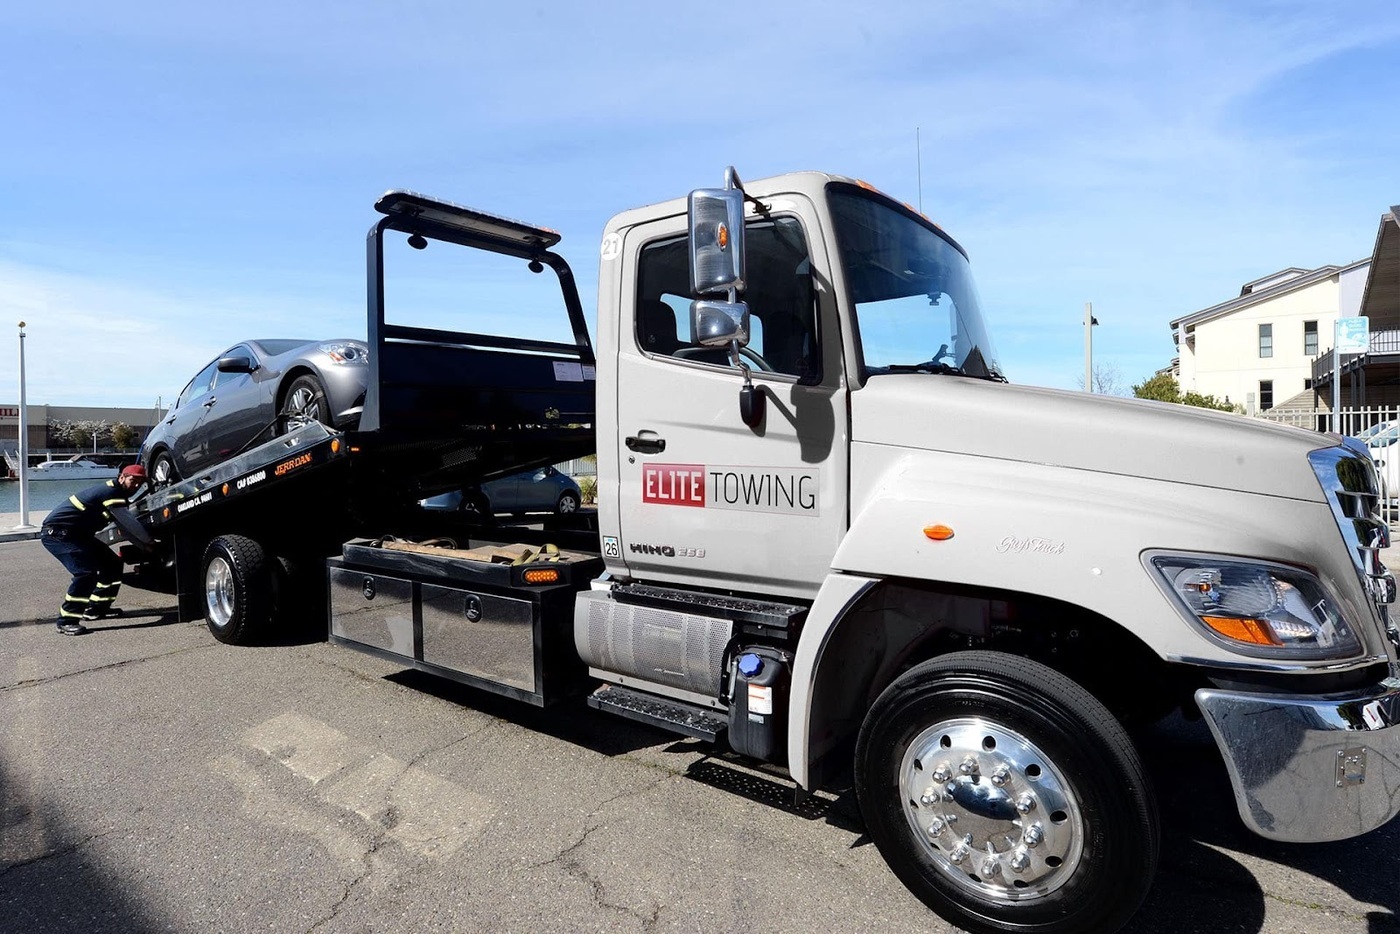 Elite Towing Irving is a professional towing company in Irving, TX.